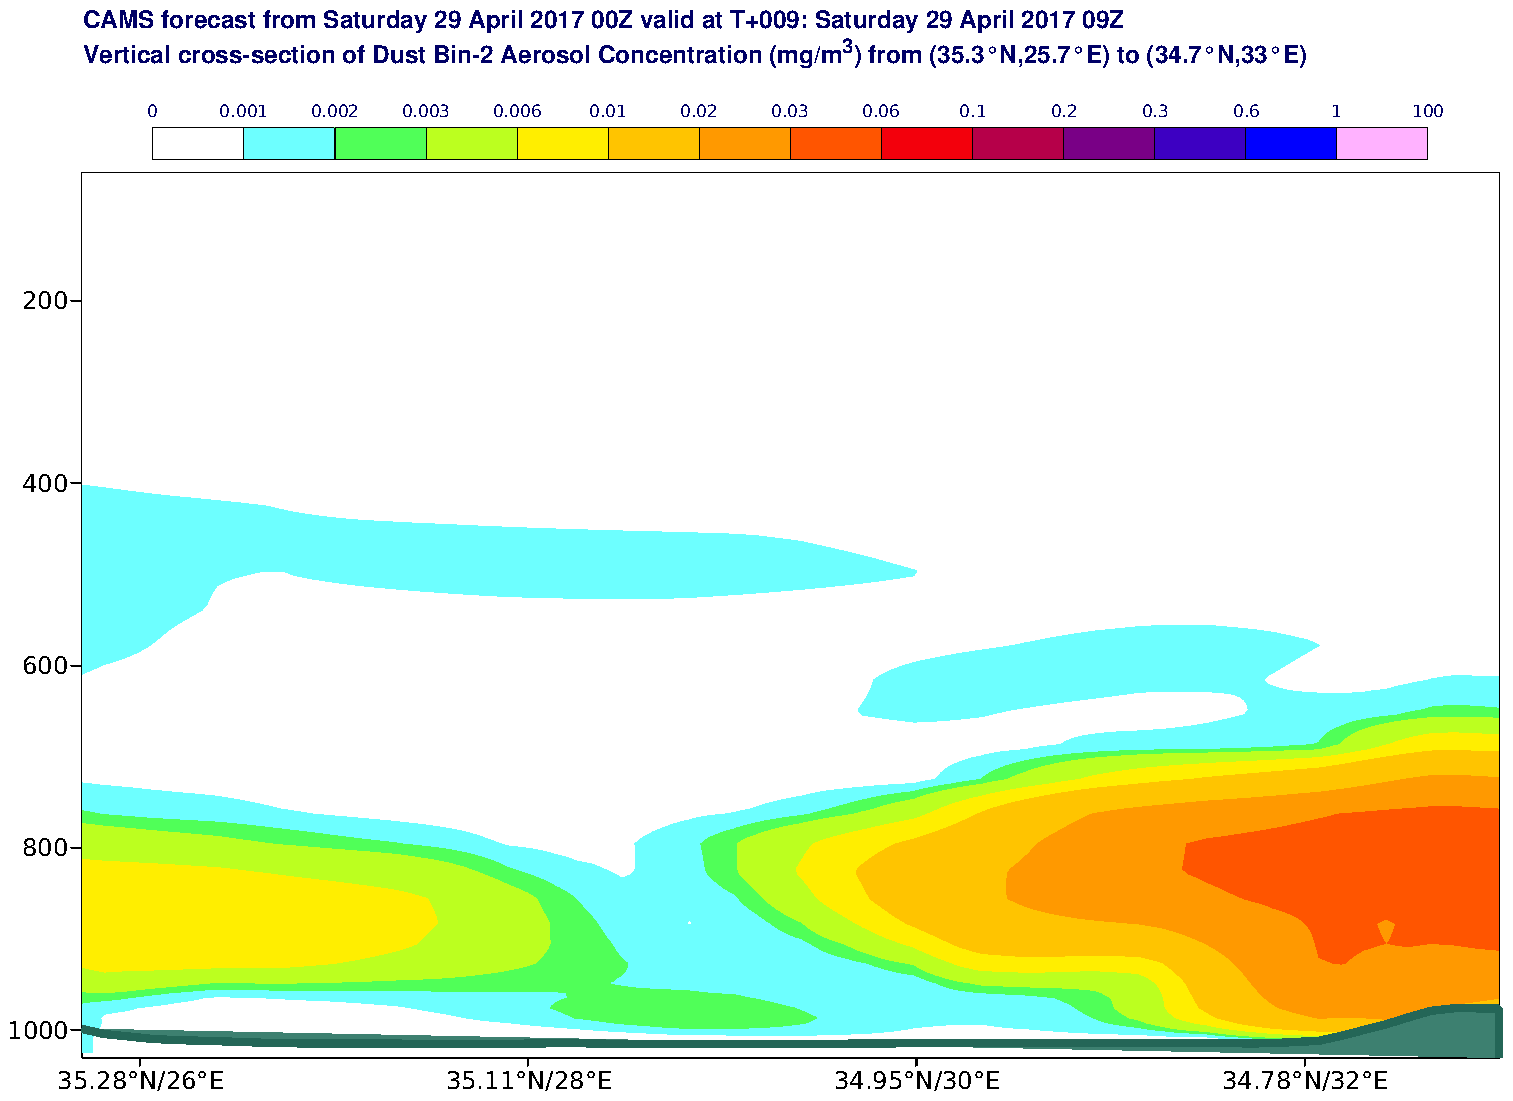 Vertical cross-section of Dust Bin-2 Aerosol Concentration (mg/m3) valid at T9 - 2017-04-29 09:00